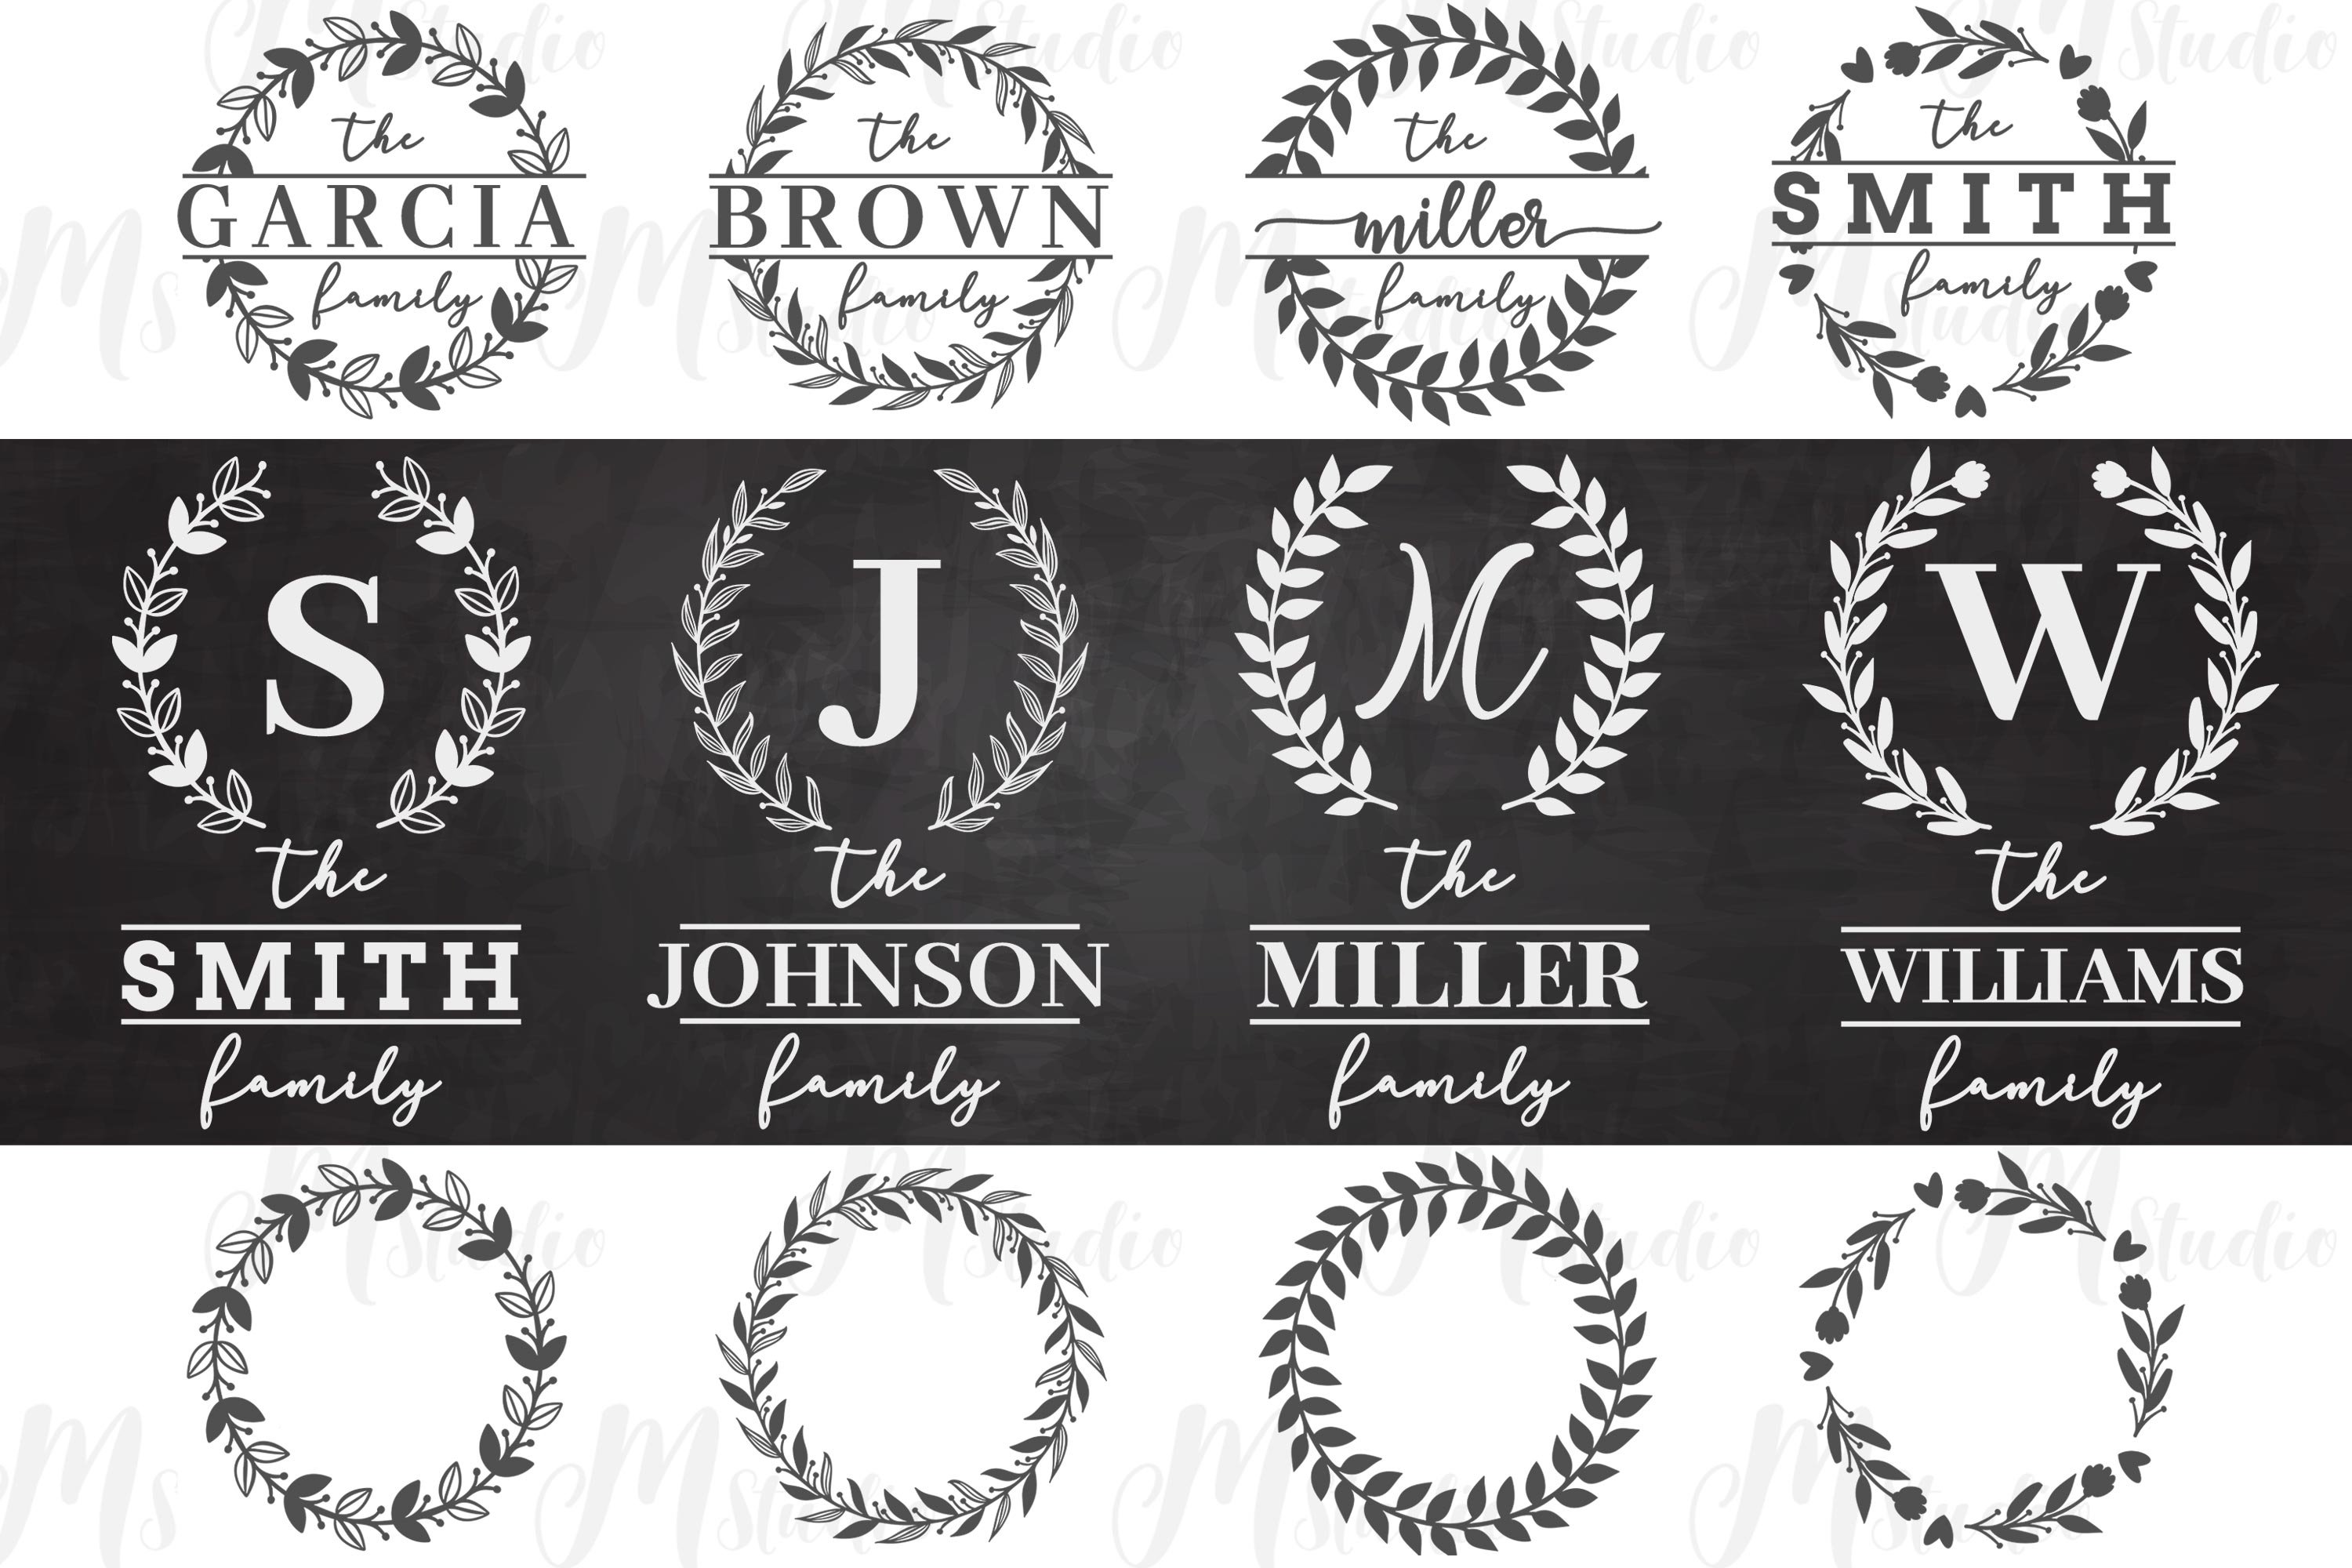 Black and white logo with wreaths.